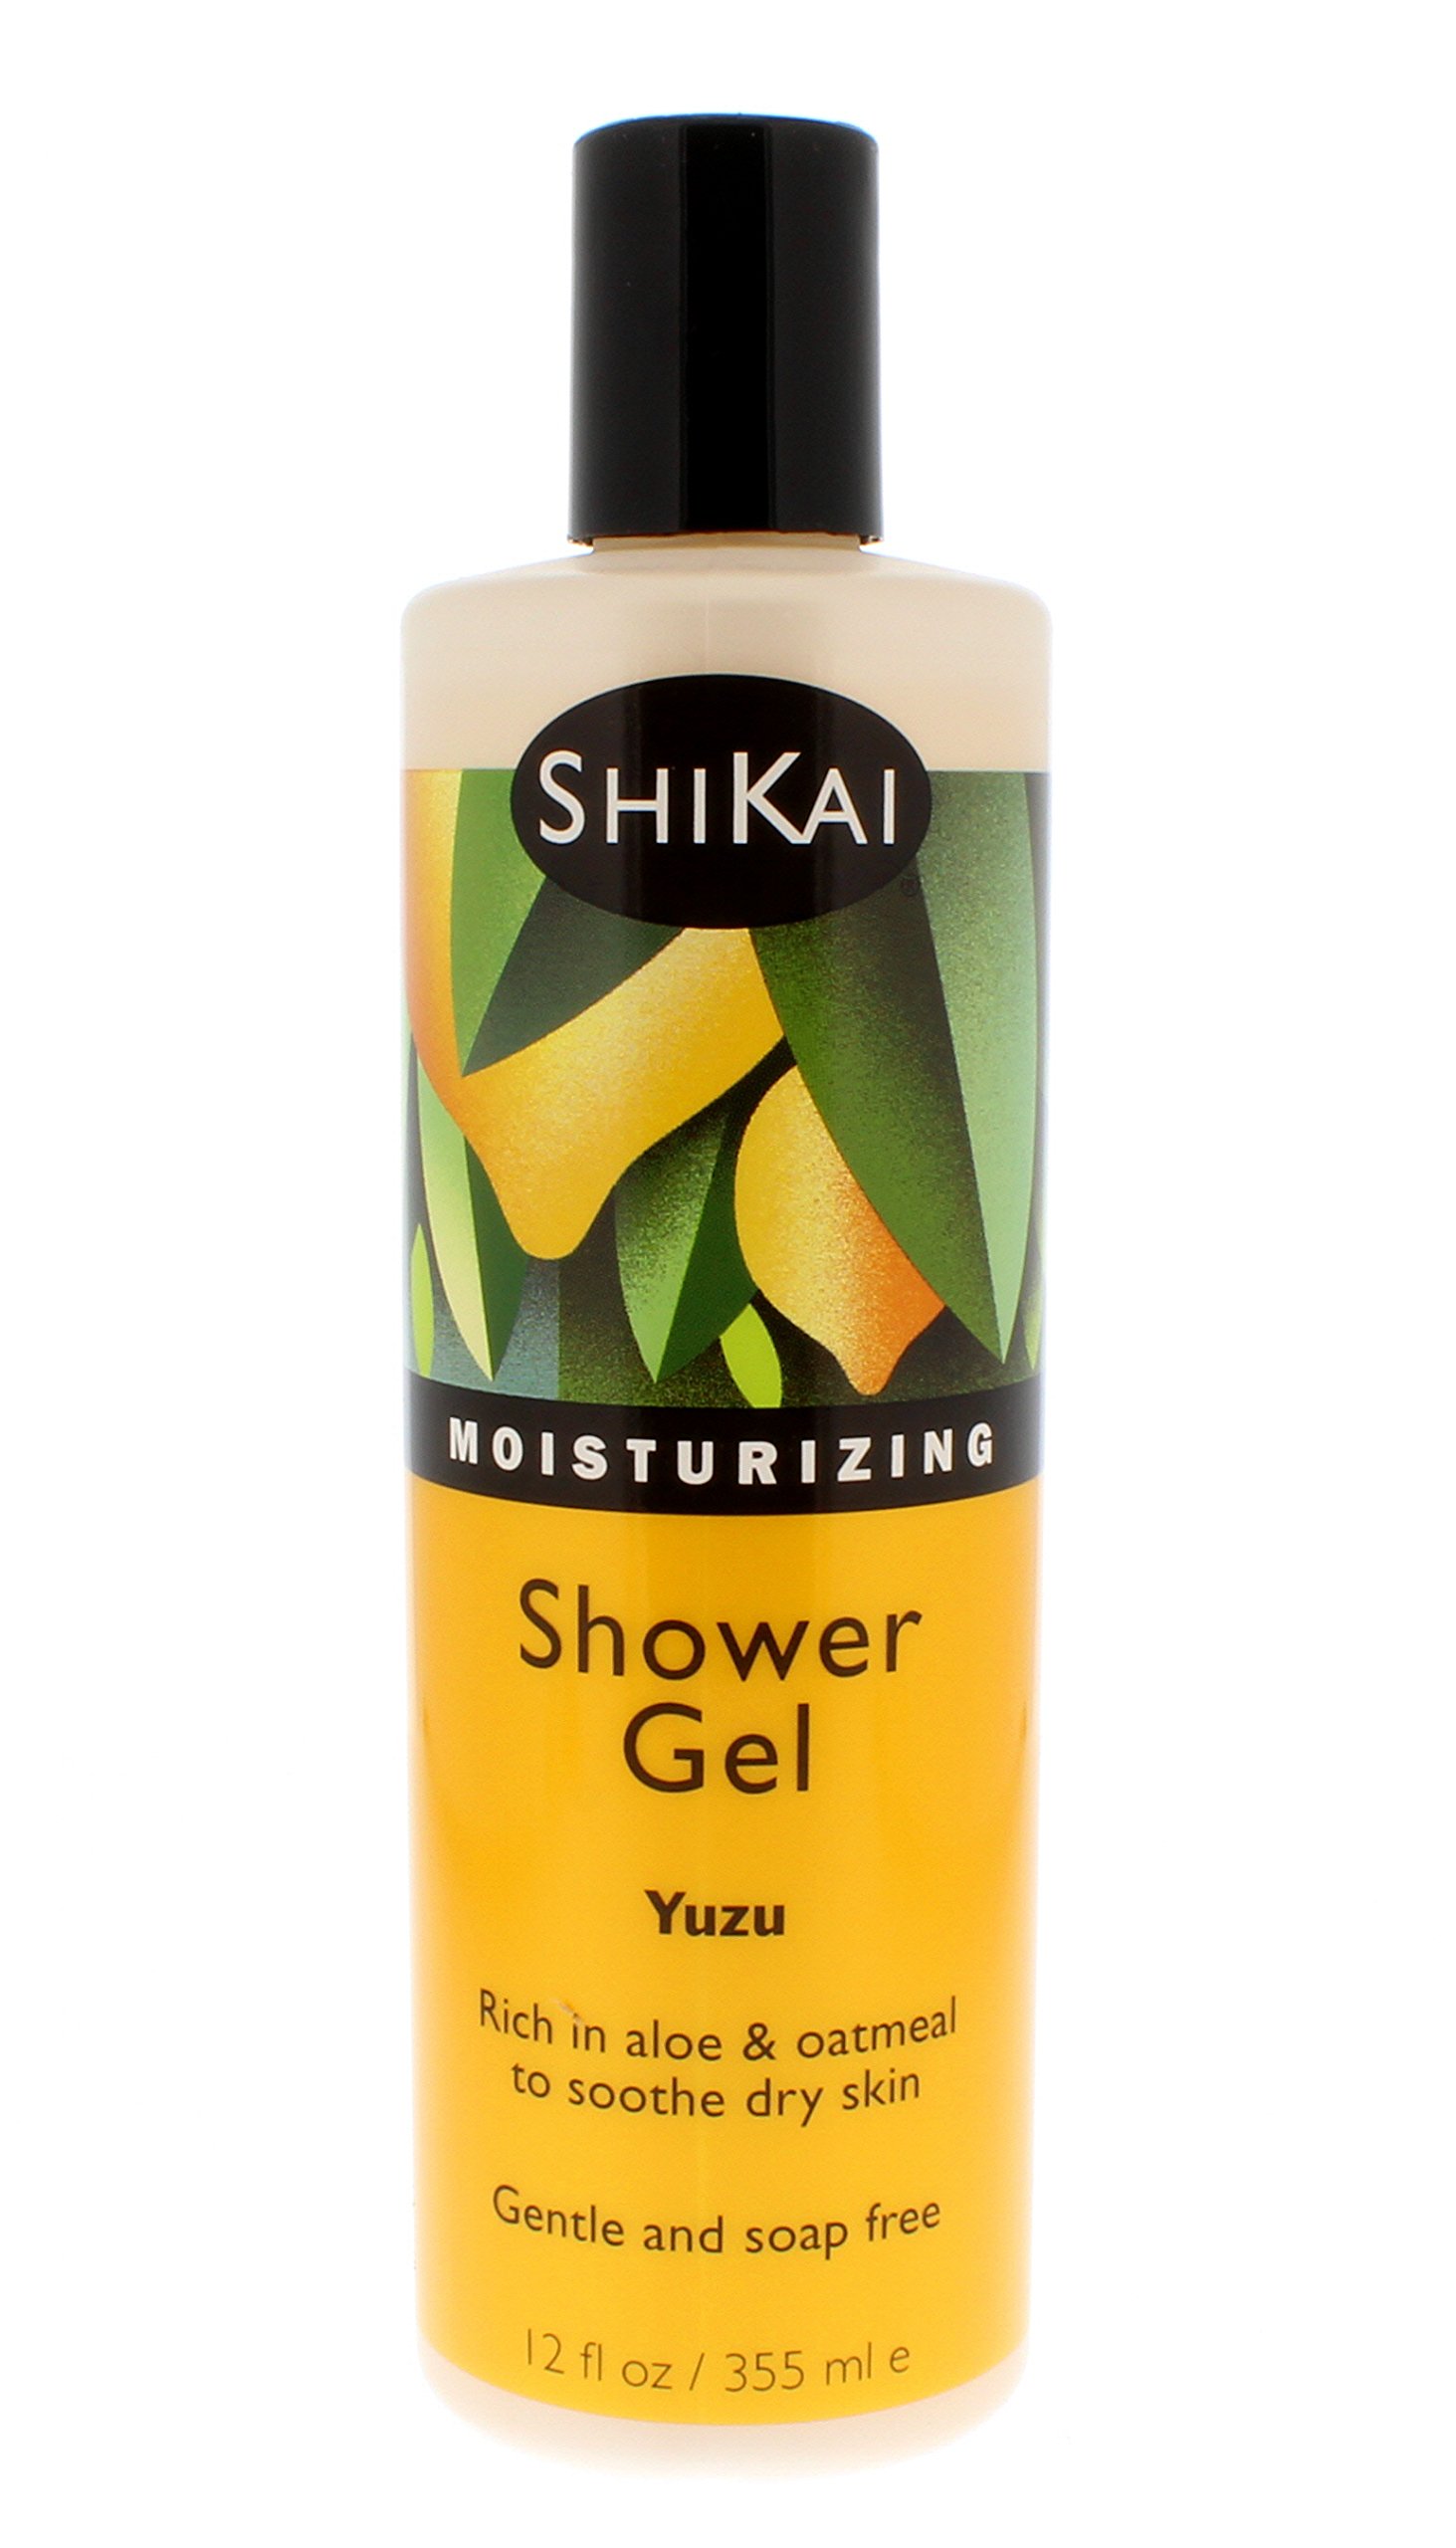 Shikai - Daily Moisturizing Shower Gel, Rich in Aloe Vera & Oatmeal That Leaves Skin Noticeably Softer & Healthier, Relief For Dry Skin, Gentle Soap-Free Formula (Yuzu, 12 Ounces)